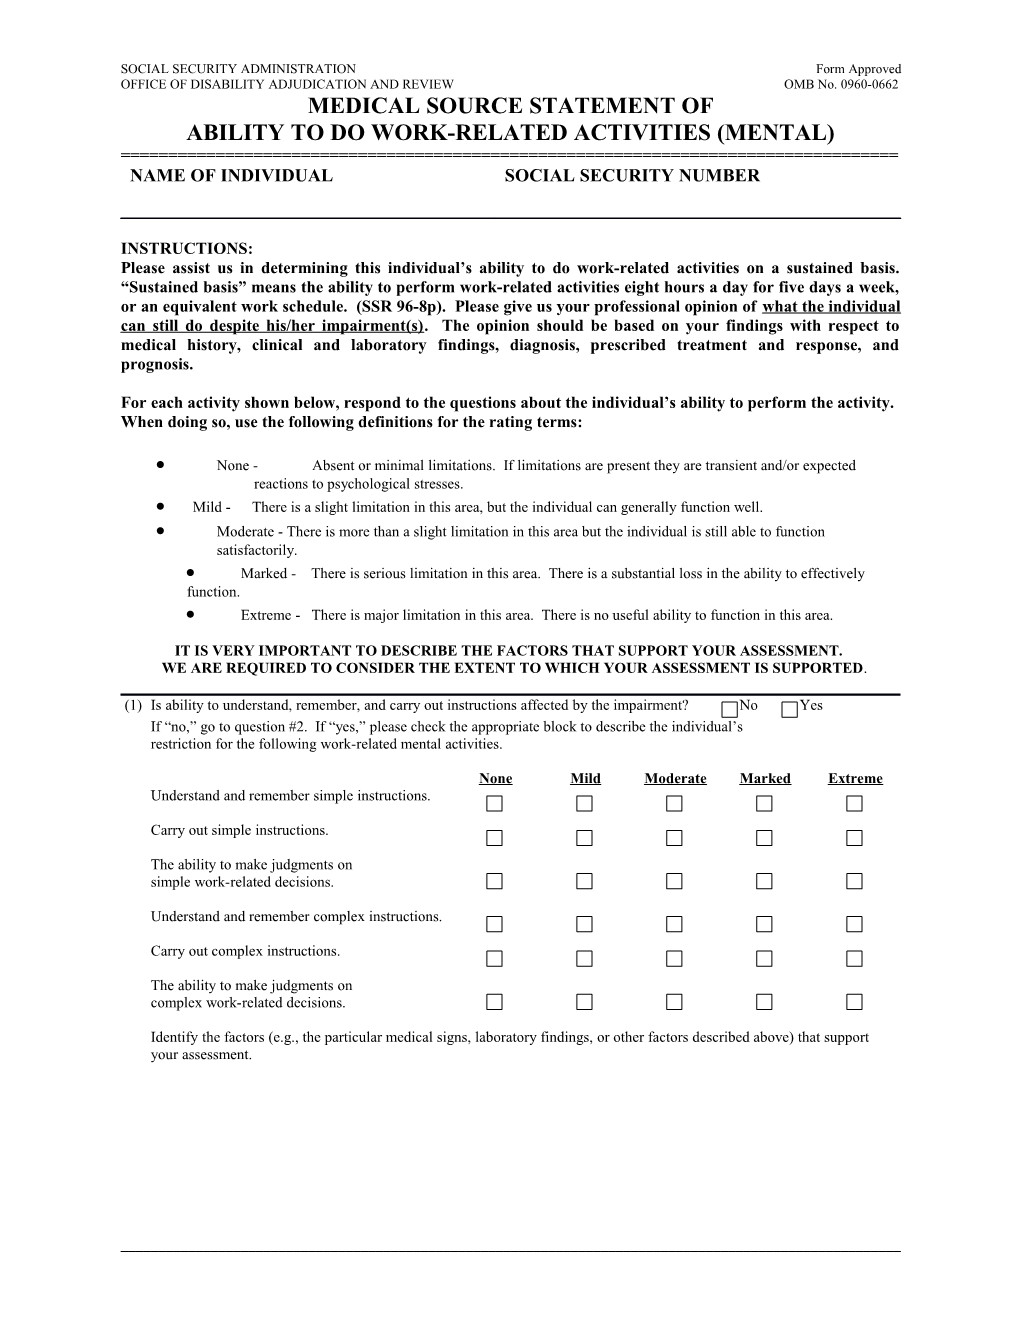 SOCIAL SECURITY ADMINISTRATION Form Approved